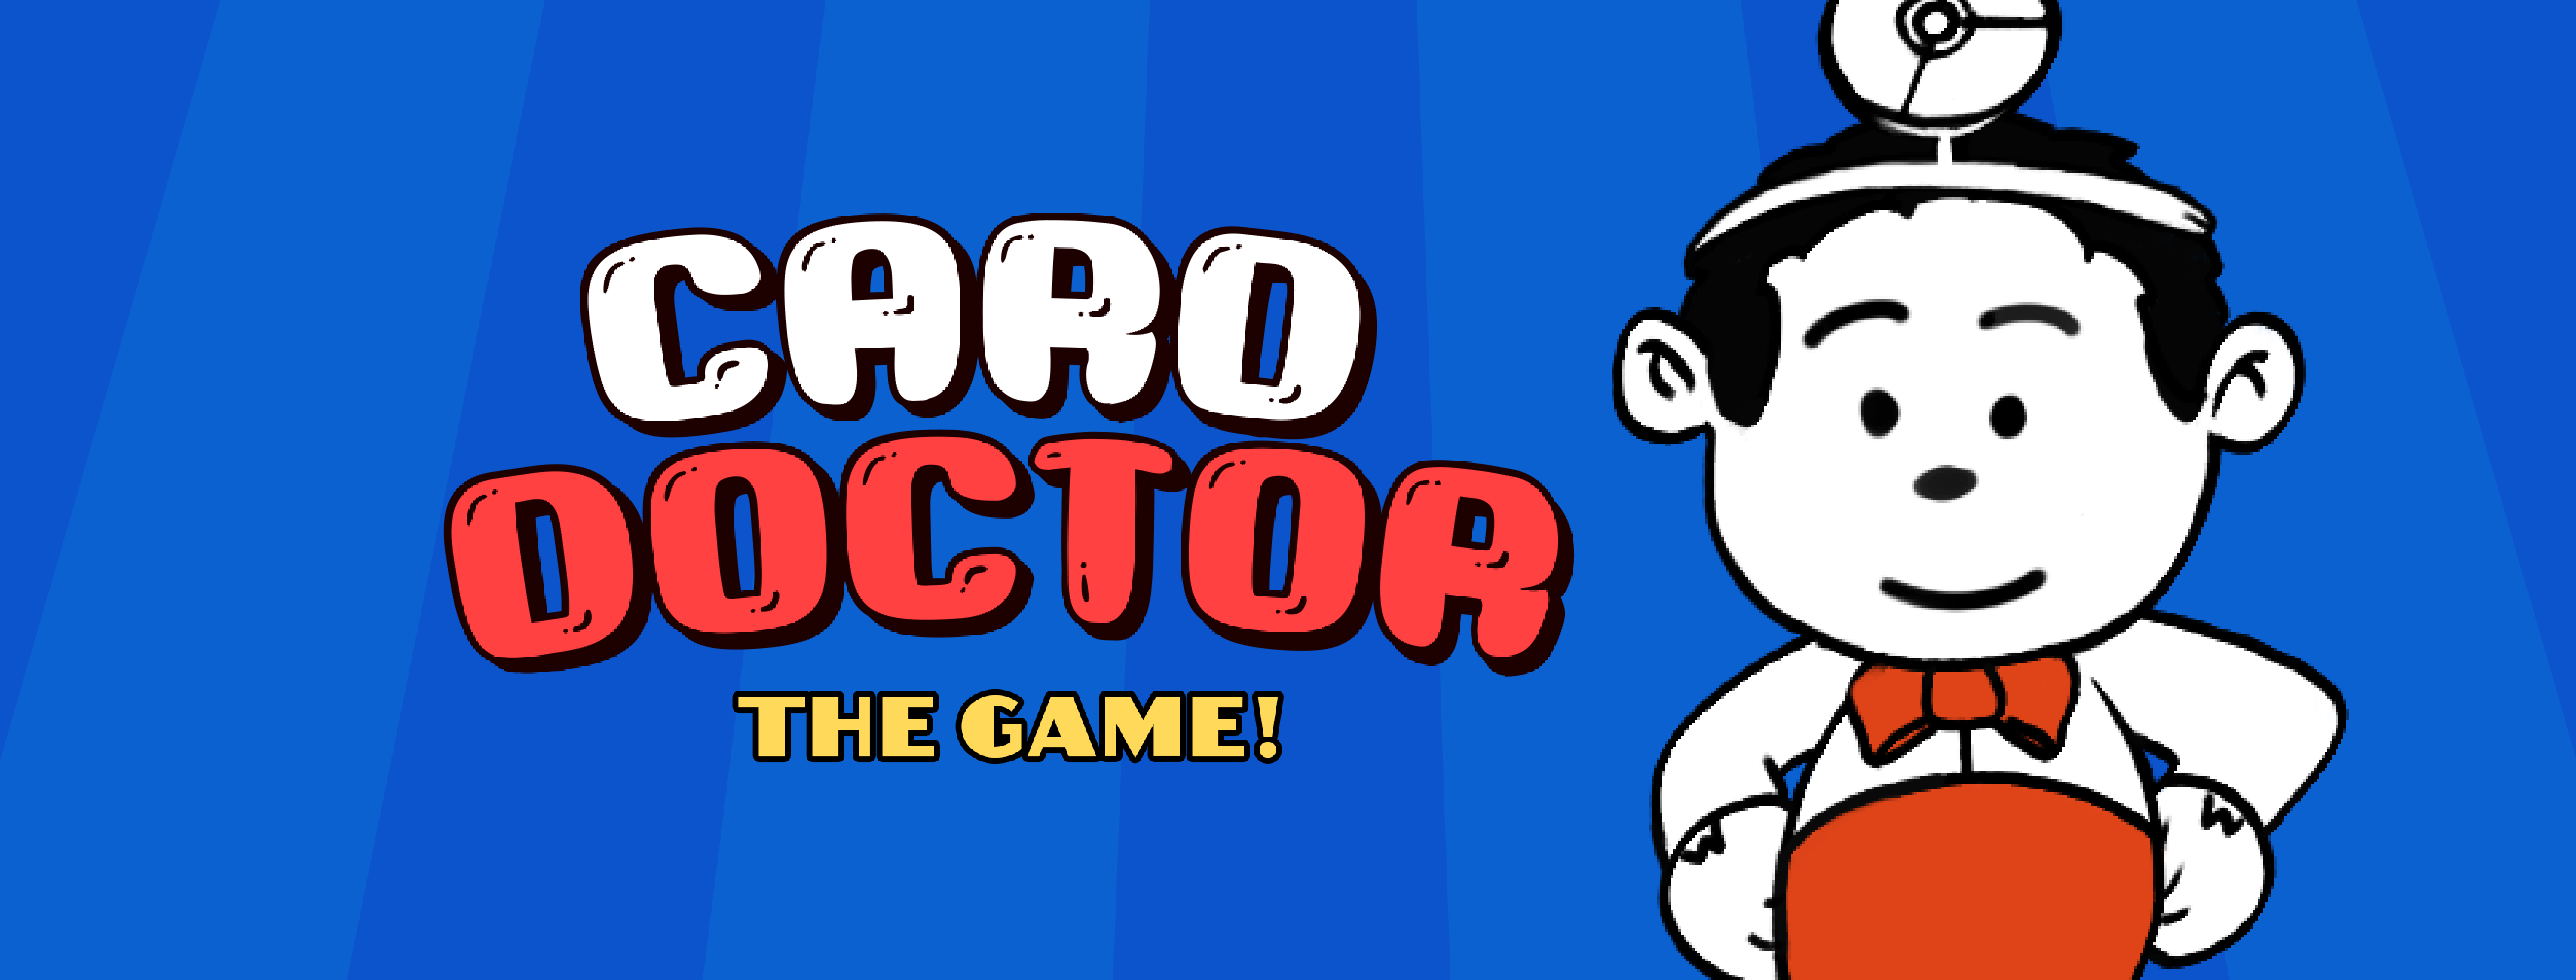 Card Doctor The Game